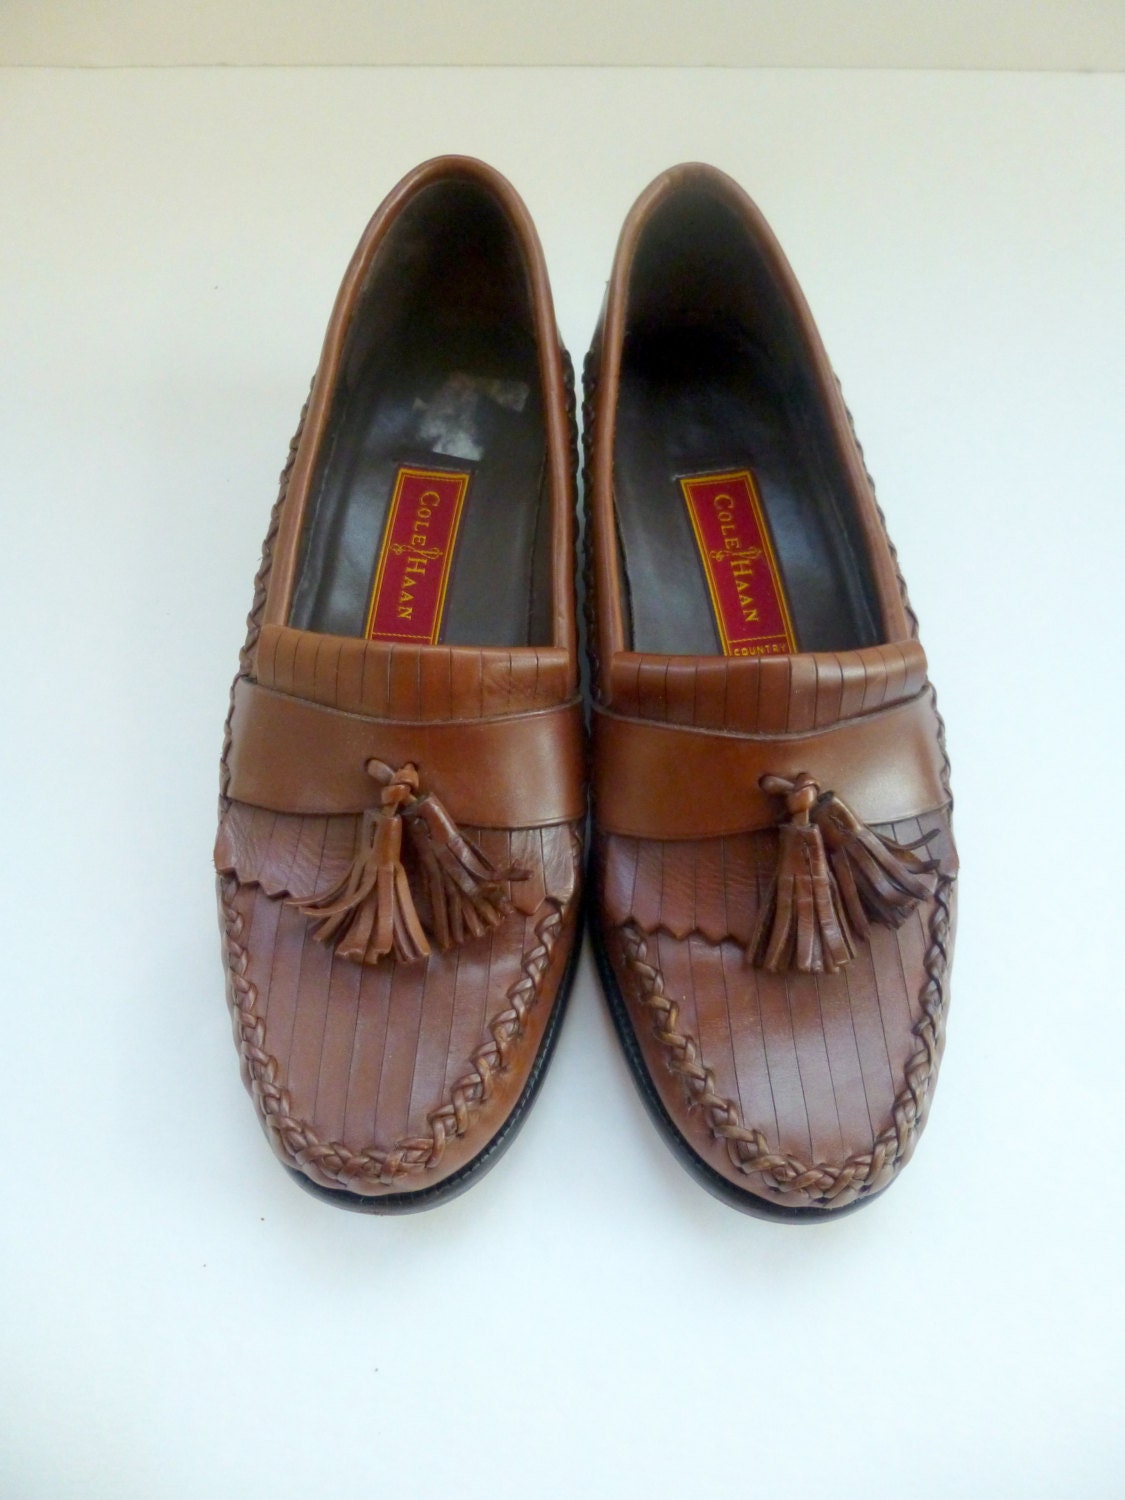 Sale Was 35.00 Now 25.00 Vintage Cole Haan Shoes by UrbanRecycle